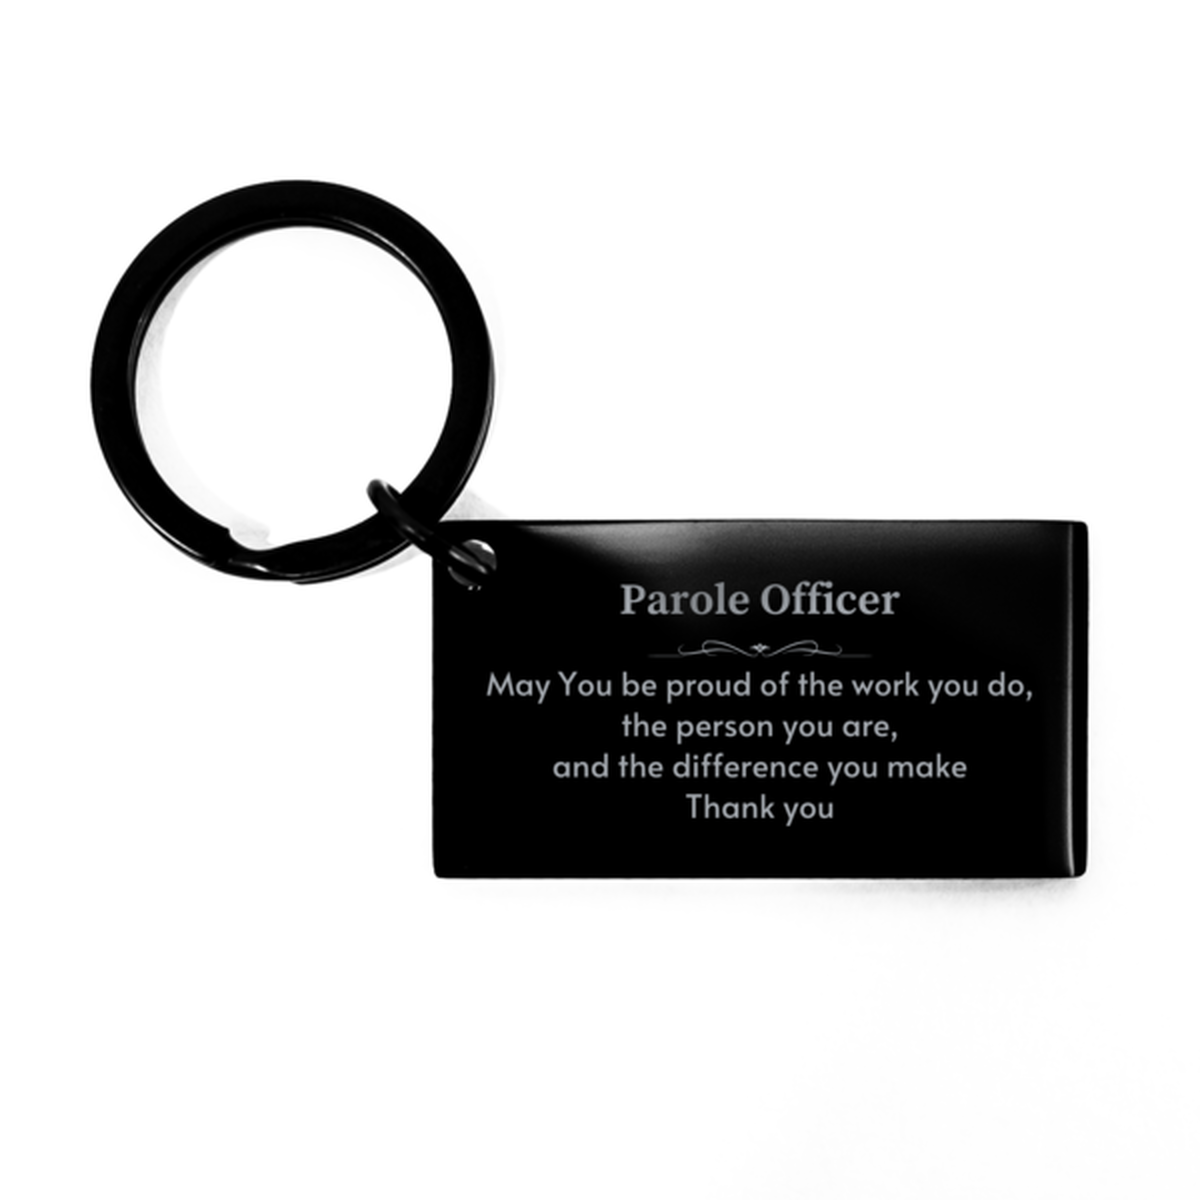 Heartwarming Keychain Retirement Coworkers Gifts for Parole Officer, Quilter May You be proud of the work you do, the person you are Gifts for Boss Men Women Friends